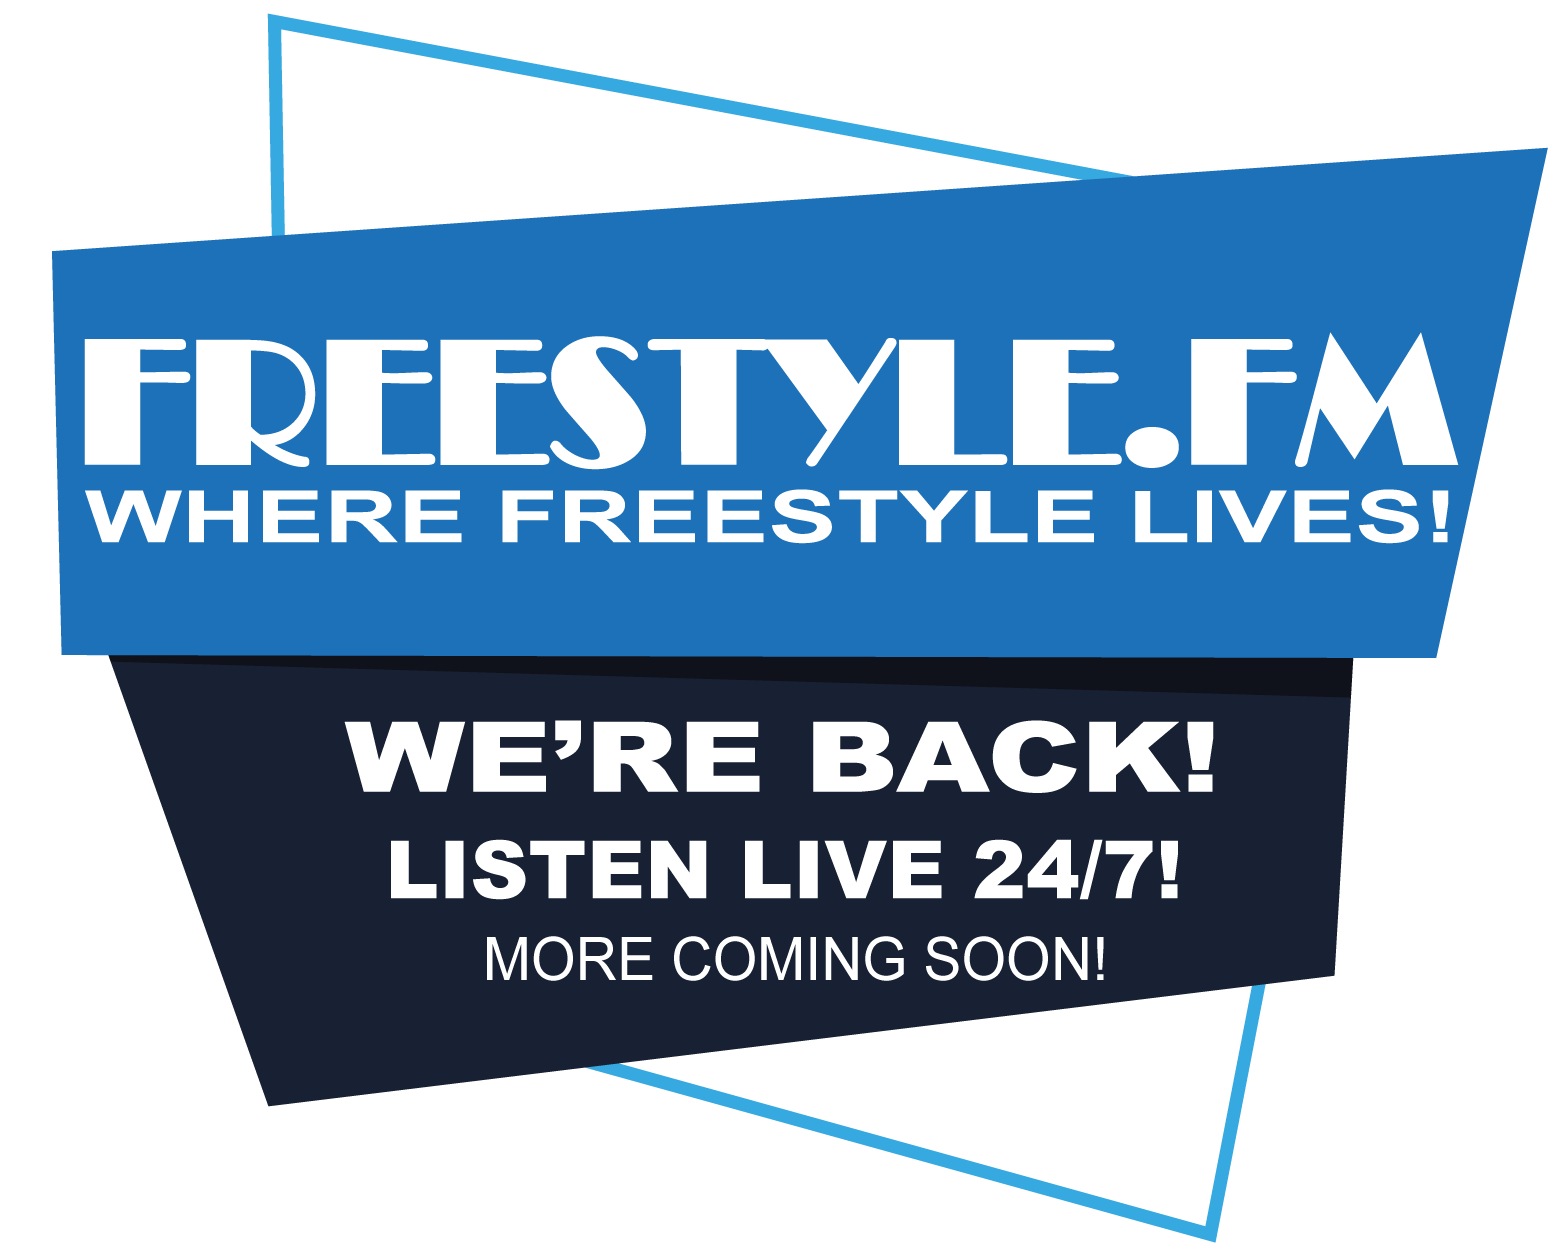 Freestyle.fm - We're Back